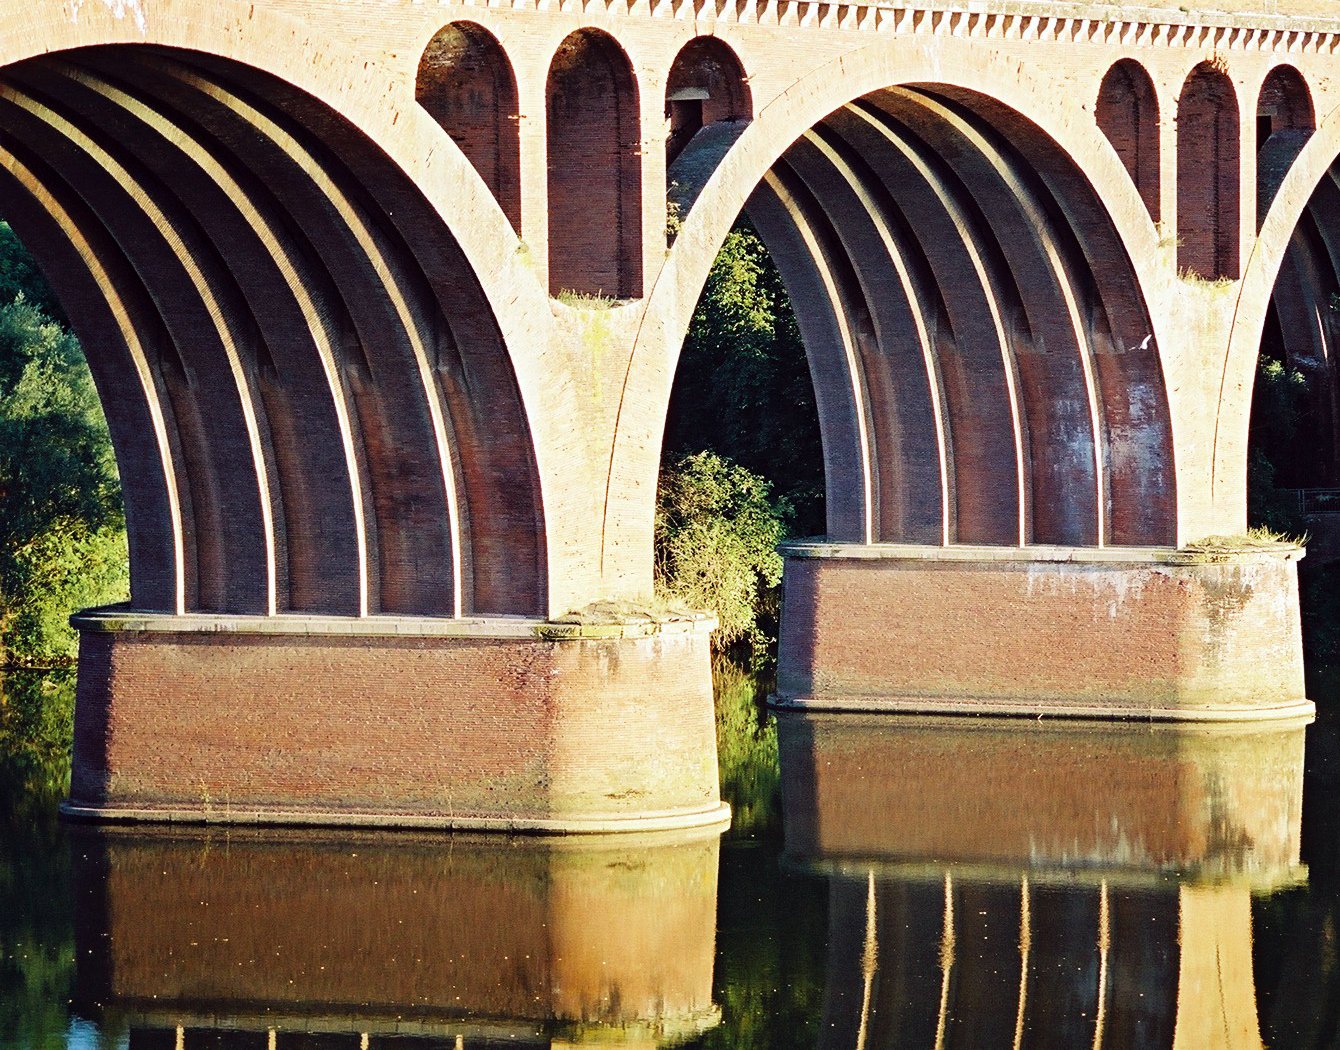 the arches and pillars are reflecting on the water